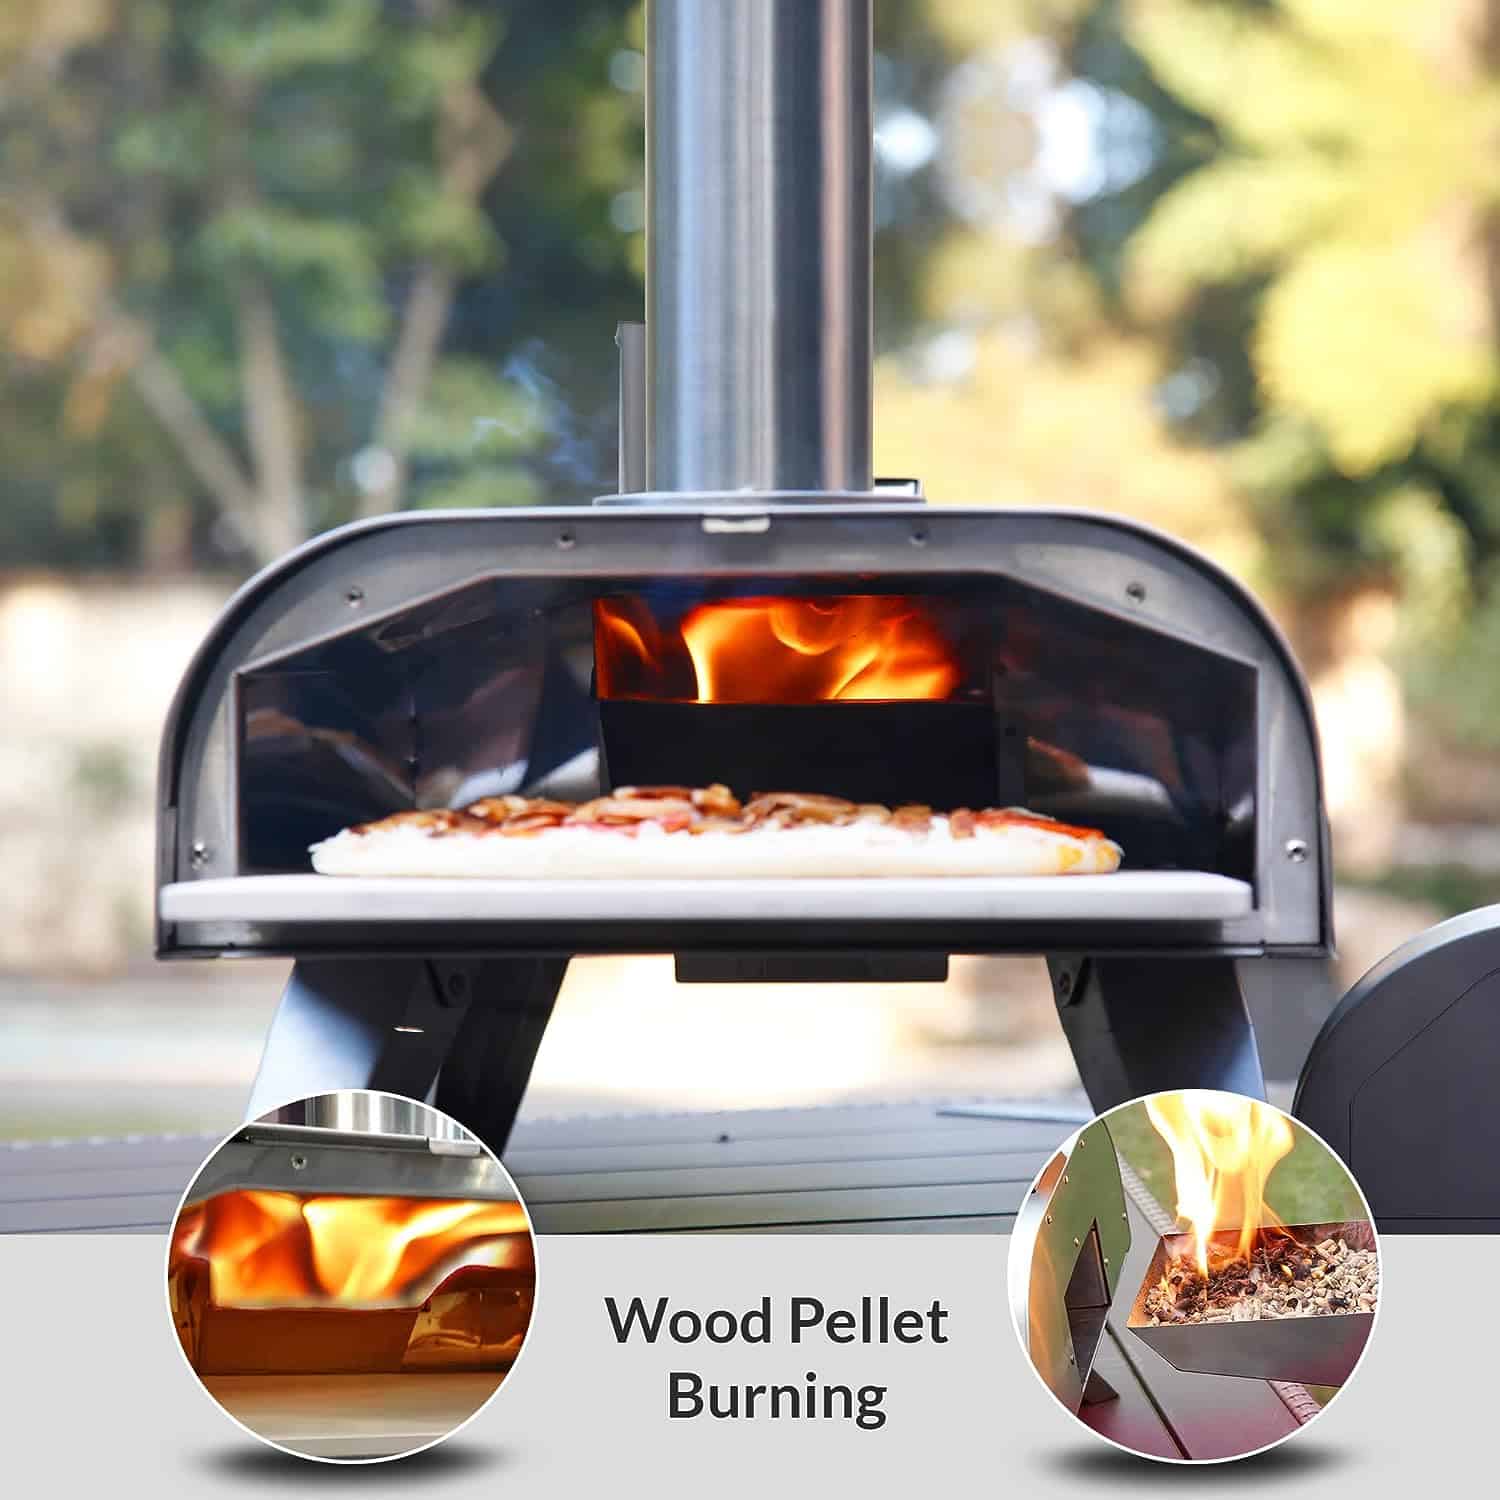 BIG HORN OUTDOORS 12 Inch Wood Pellet Burning Pizza Oven, Portable Stainless Steel Pizza Grill with Pizza Stone for Outside 3